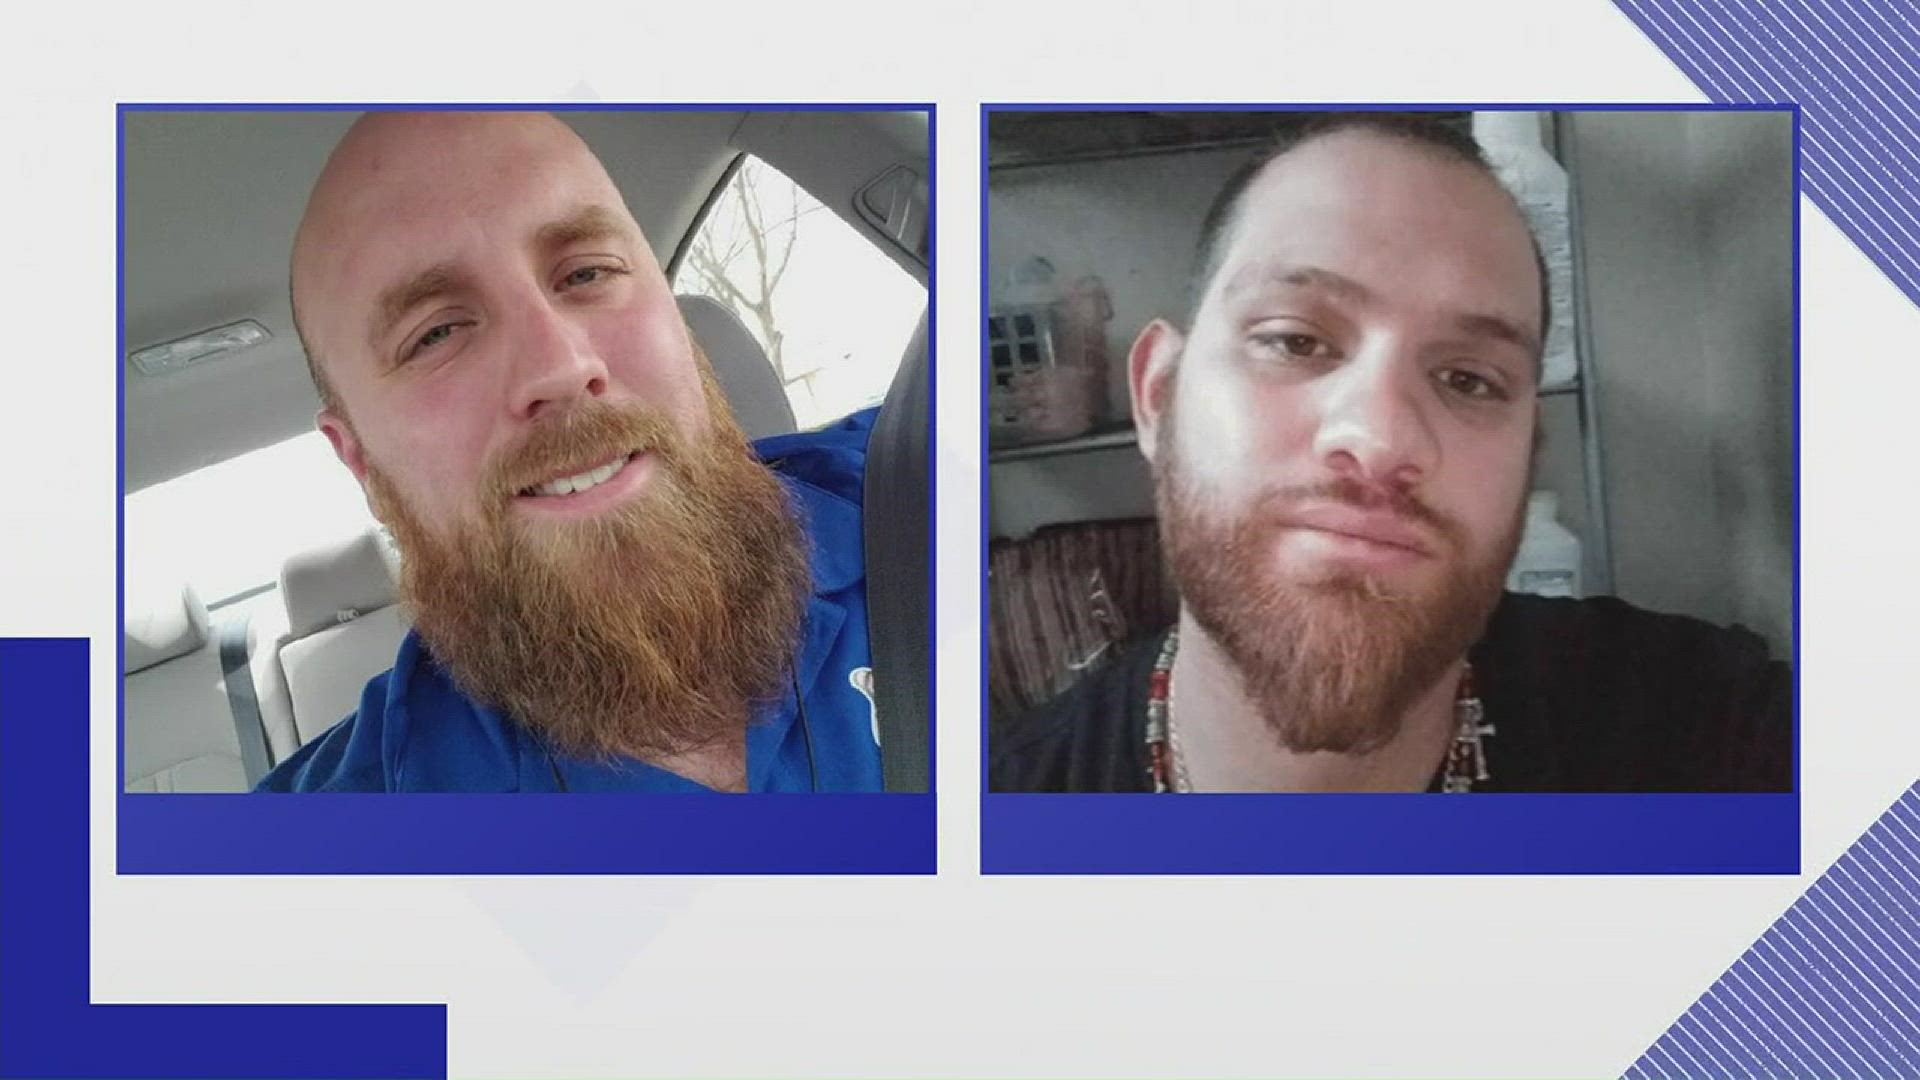 Investigators with the Arapahoe County Sheriff's Office are asking for the public's help in identifying two men suspected of luring children online for sex.